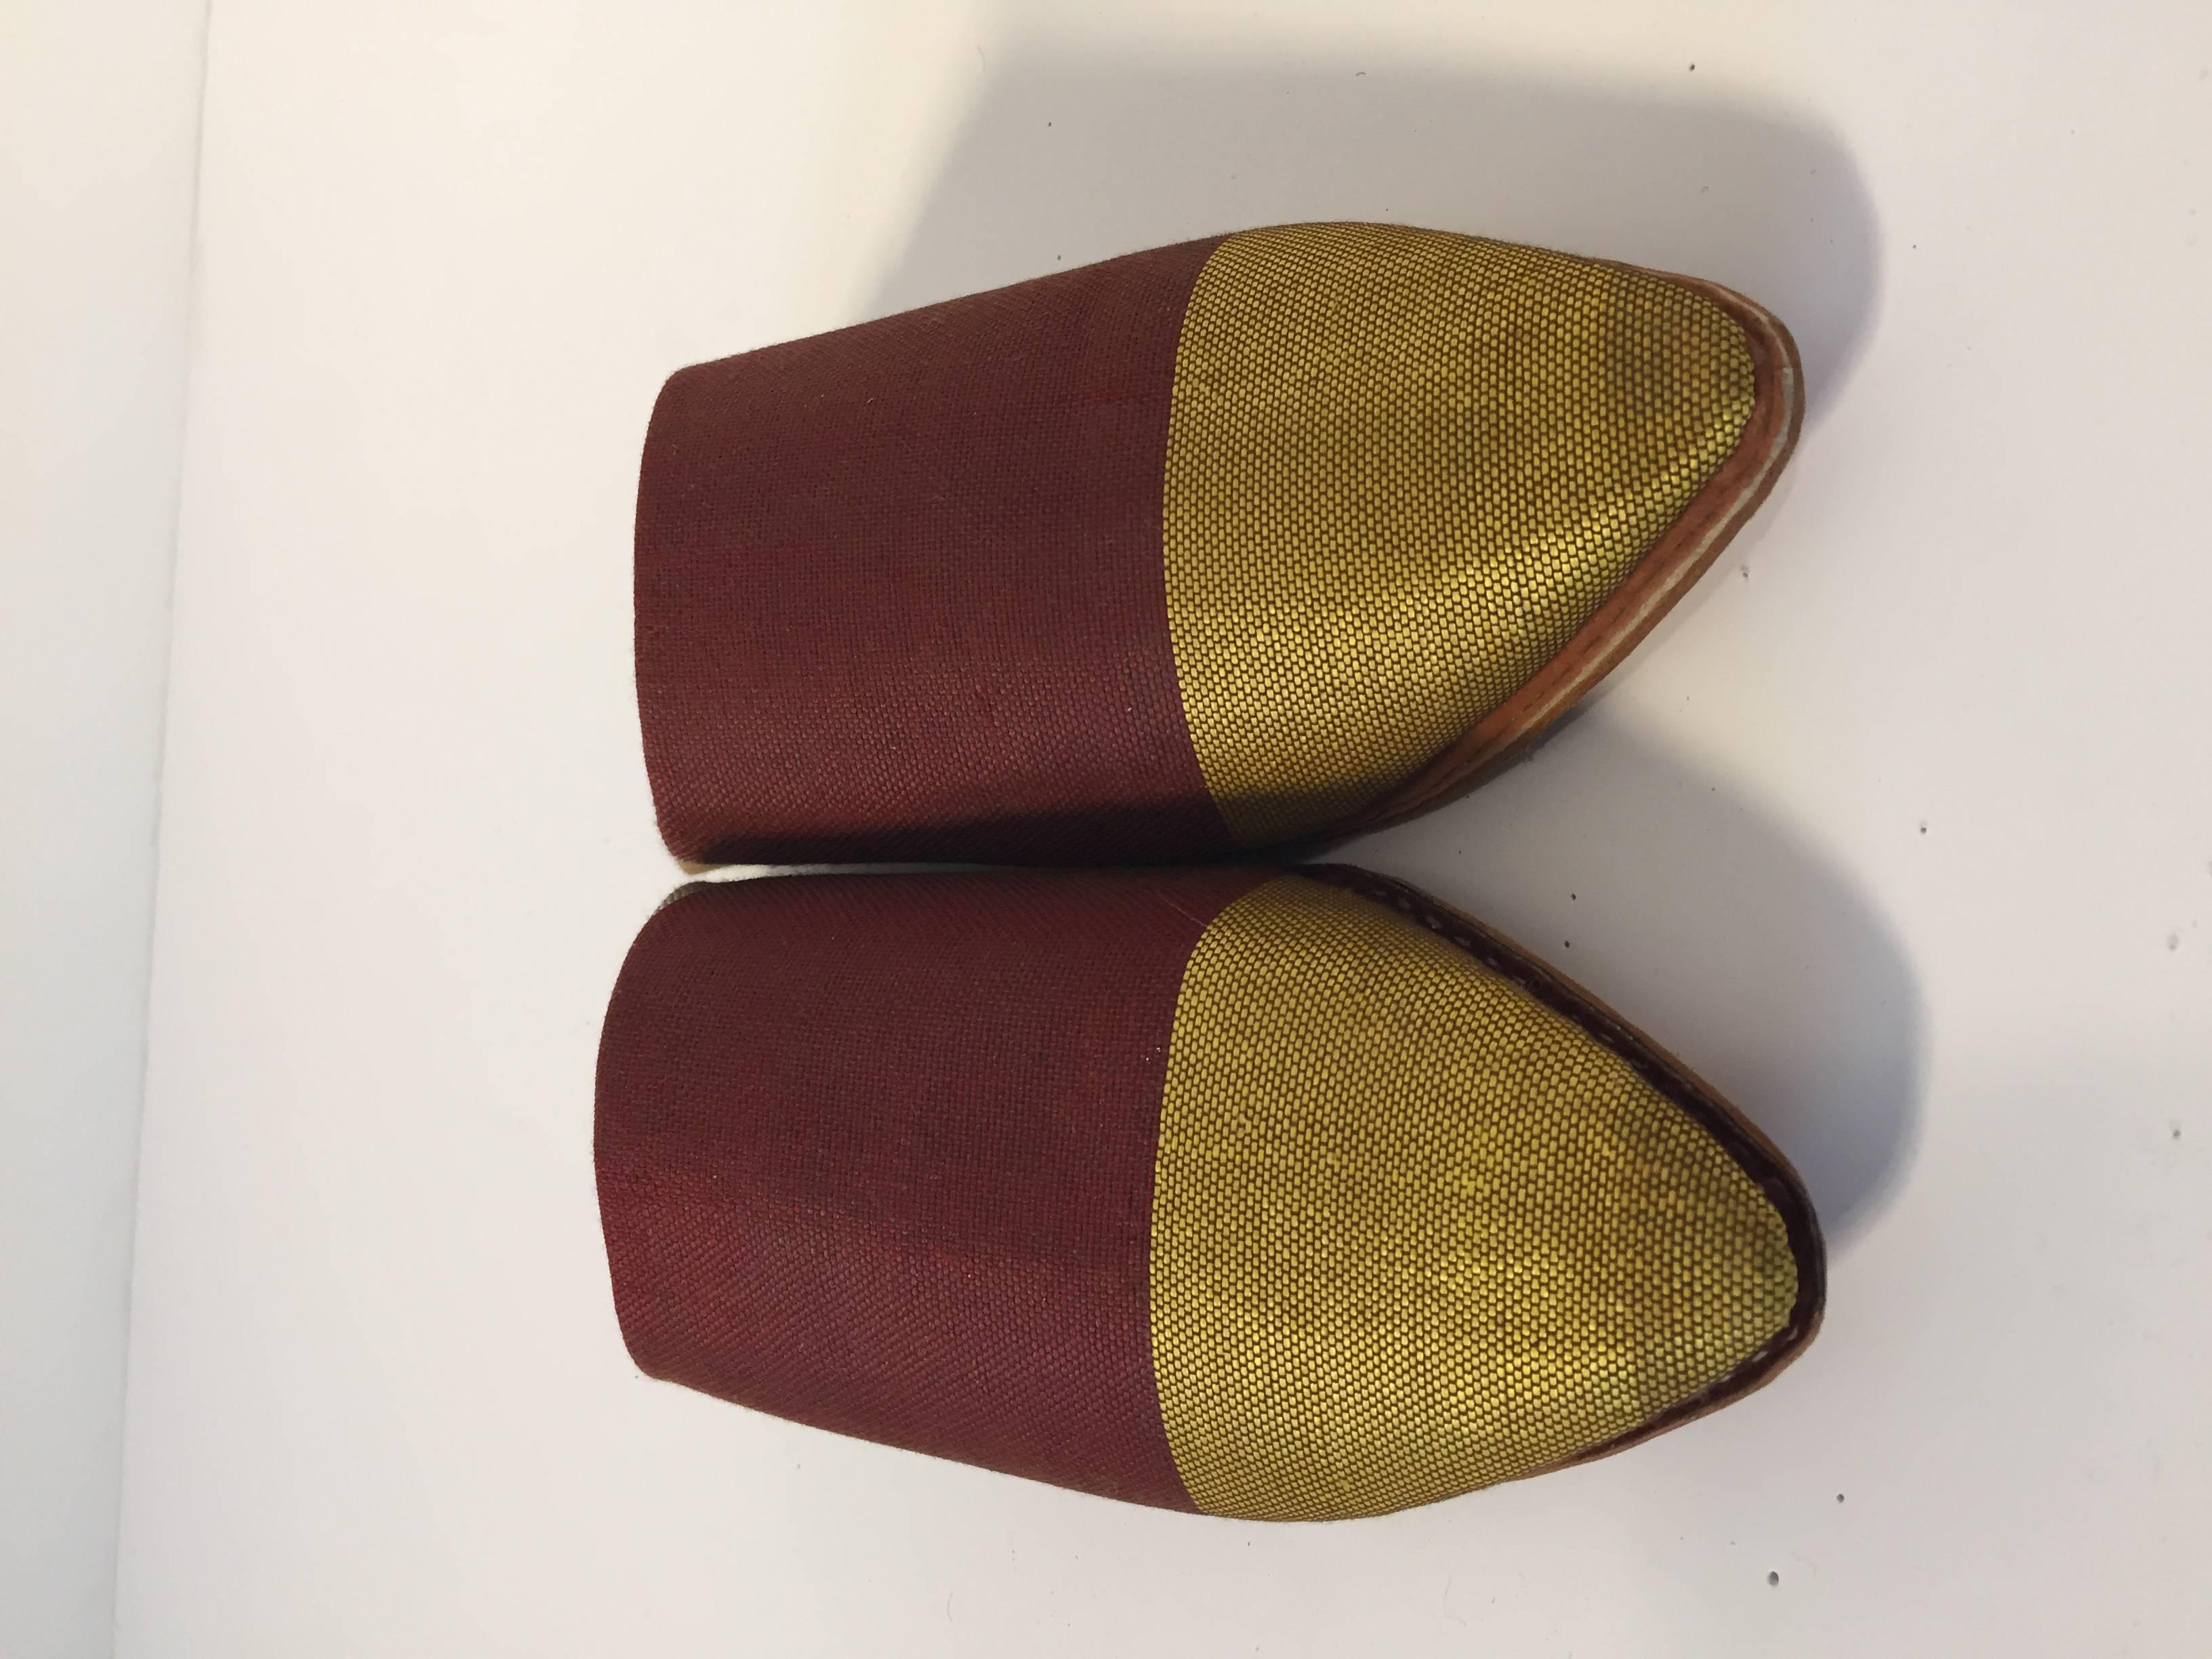 These Moroccan silk slippers are handmade to perfection the inside sole is crafted of soft leather.
hand-sewn leather sole.
You won't want to take the Moroccan babouches off your feet!
Moroccan slippers to wear around the pool or at the beach just